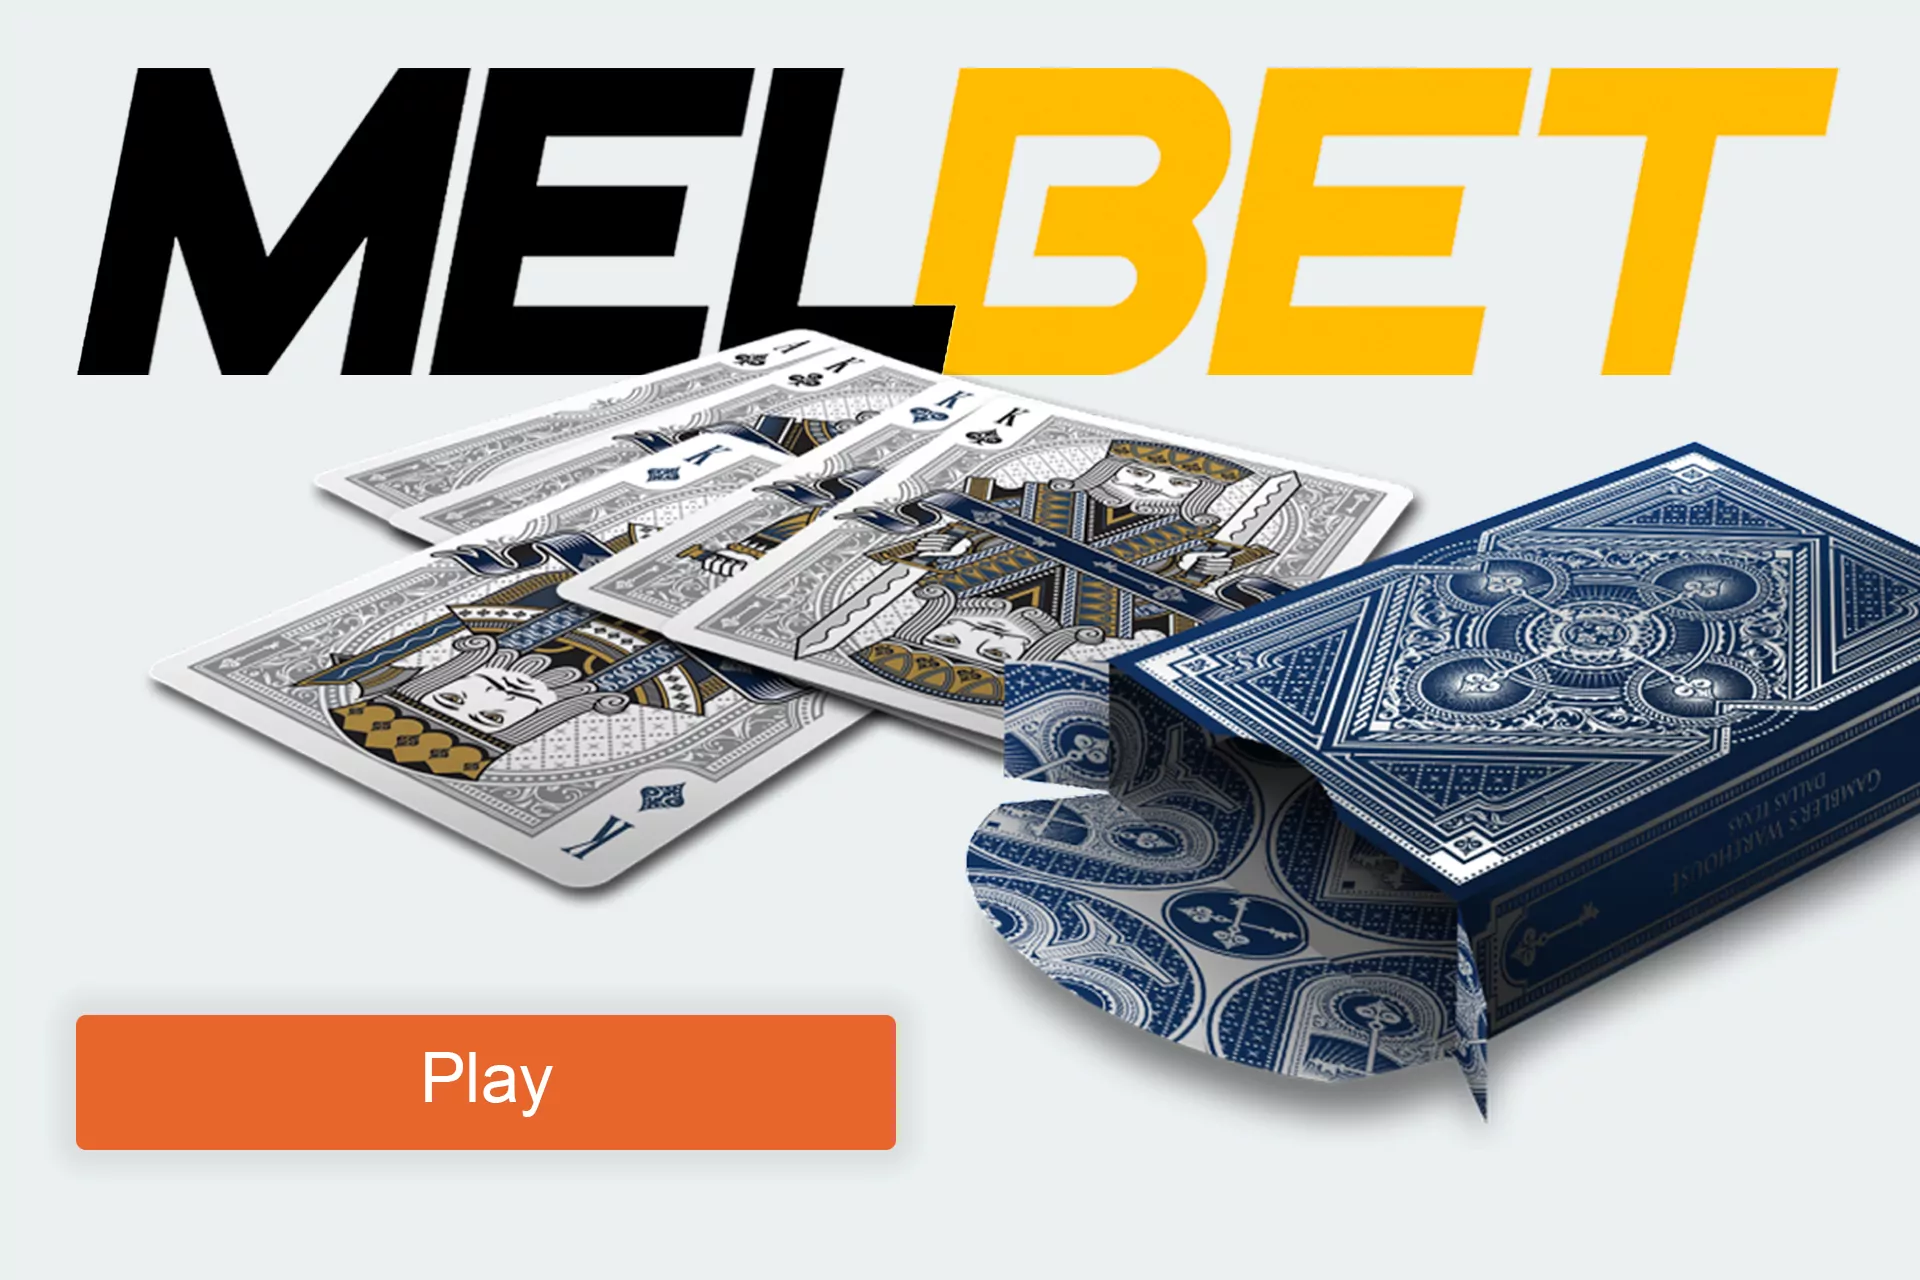 Poker is one of the most famous and popular fortune games at Melbet.